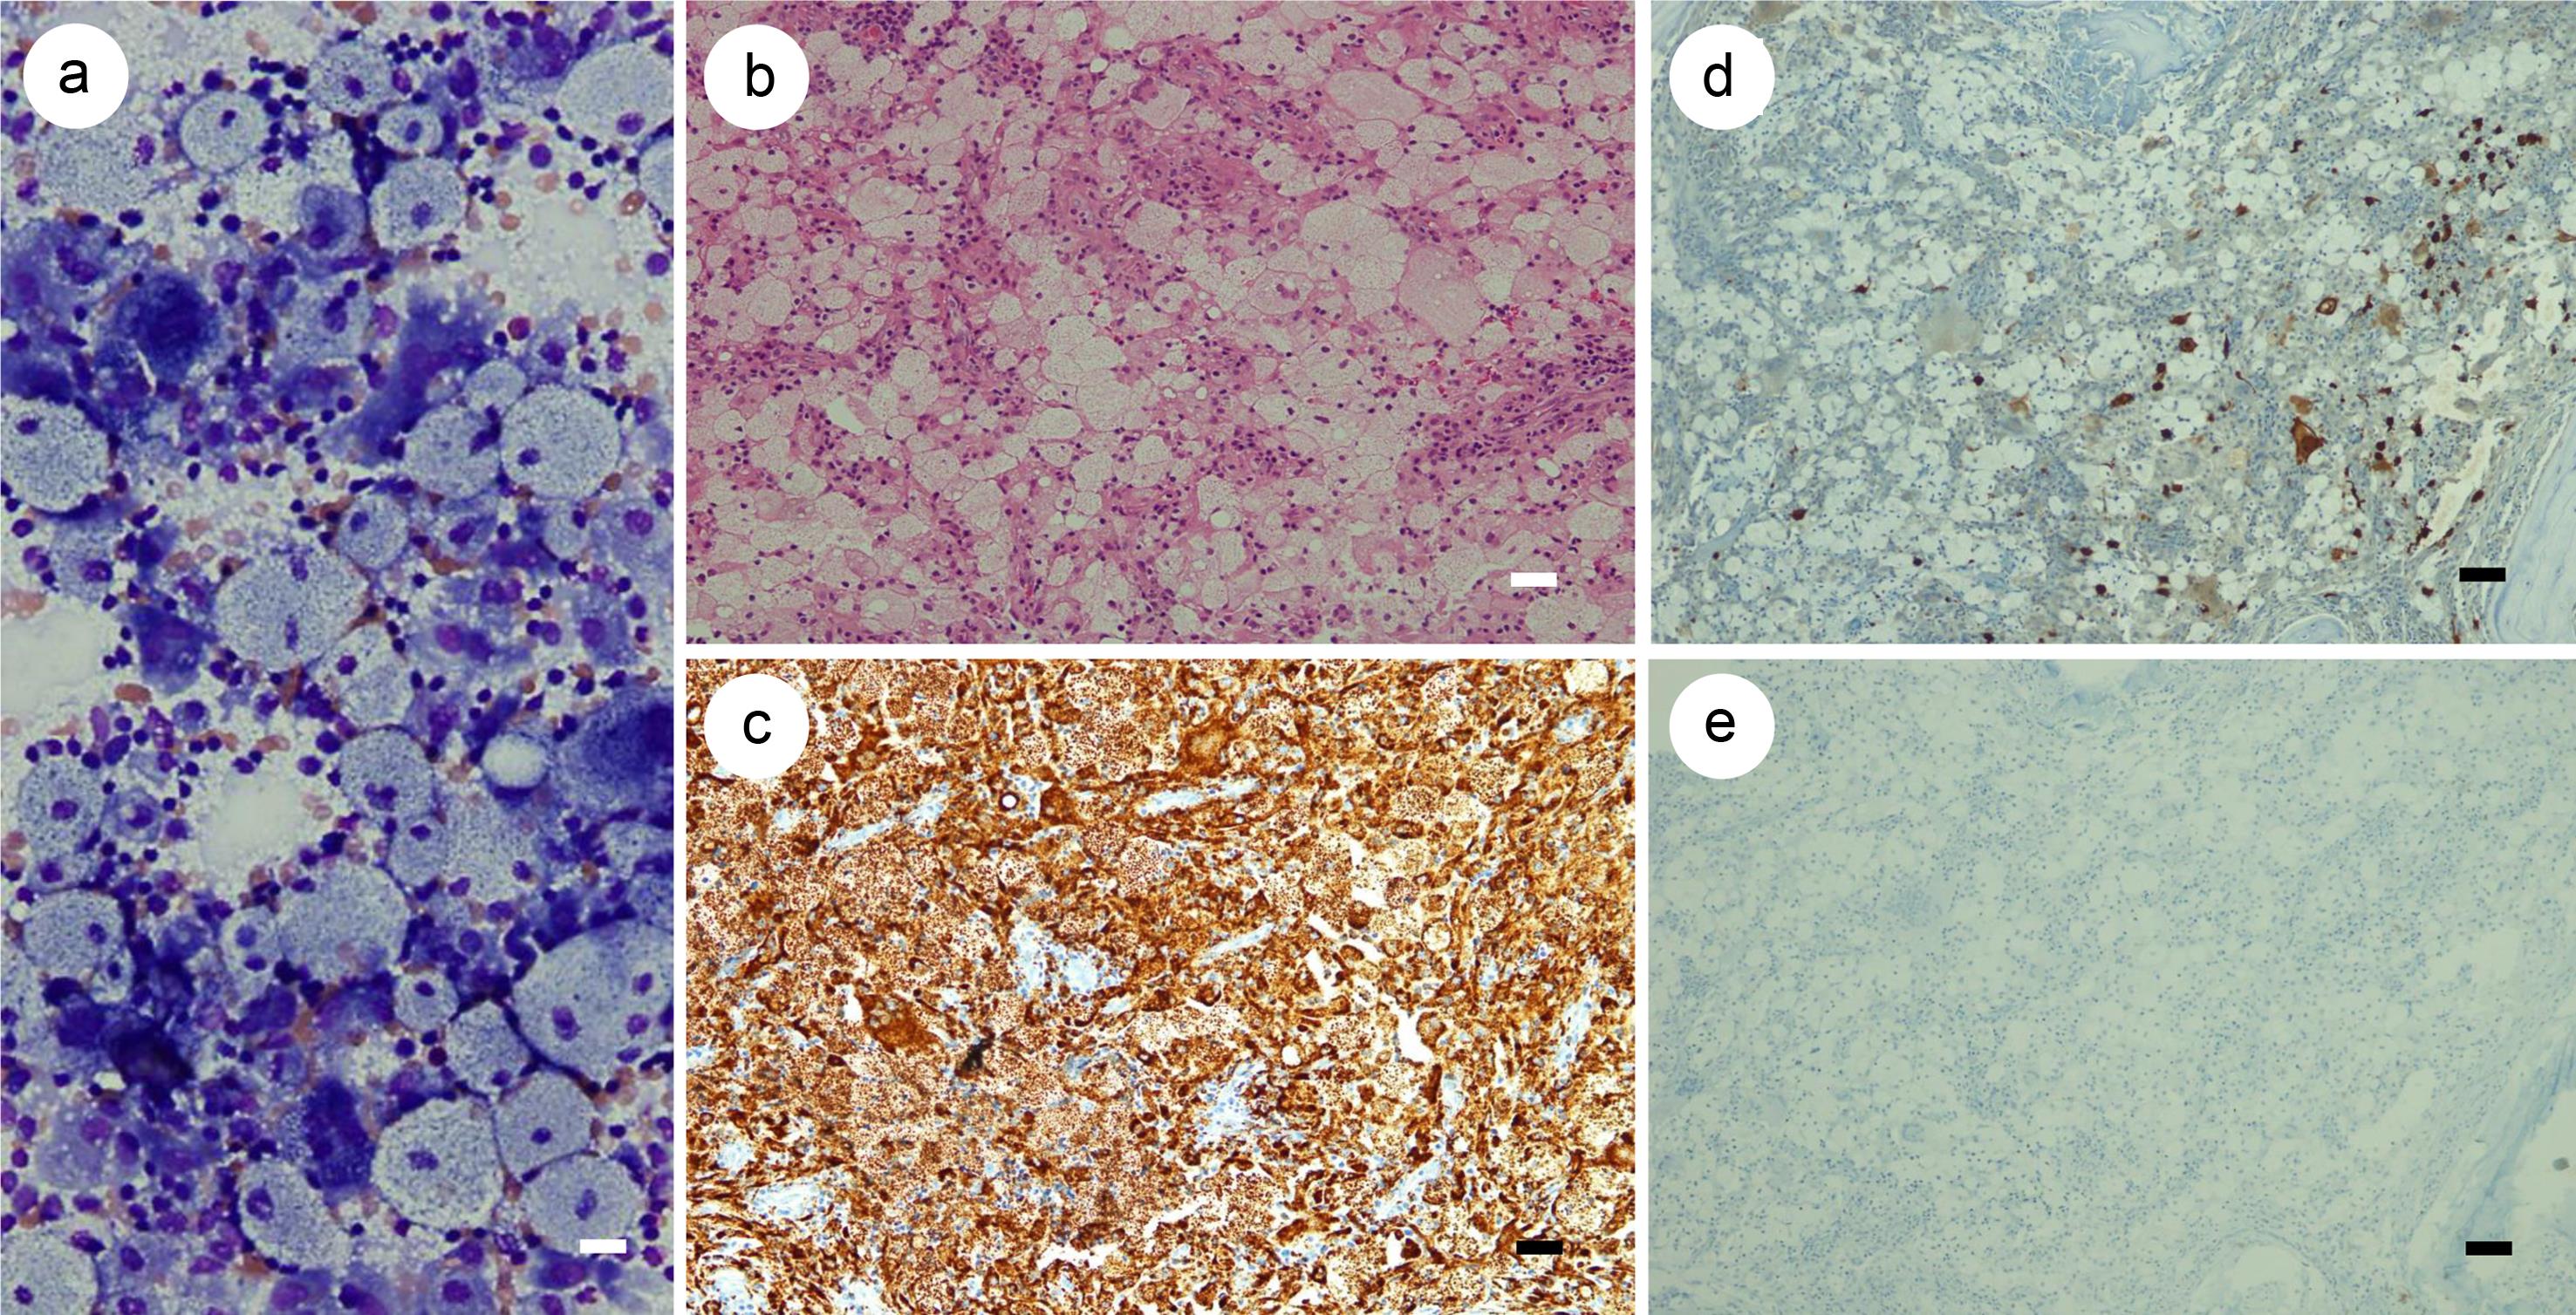 Histopathology of the biopsied bone marrow tissue shows; touch preparation (May-Giemsa stain, original magnification x1,000) (a) and embedded tissue- H&E stain (×200) (b), CD68 stain (×200) (c), S100 stain (×200) (d) and CD1a stain (×200) (e).